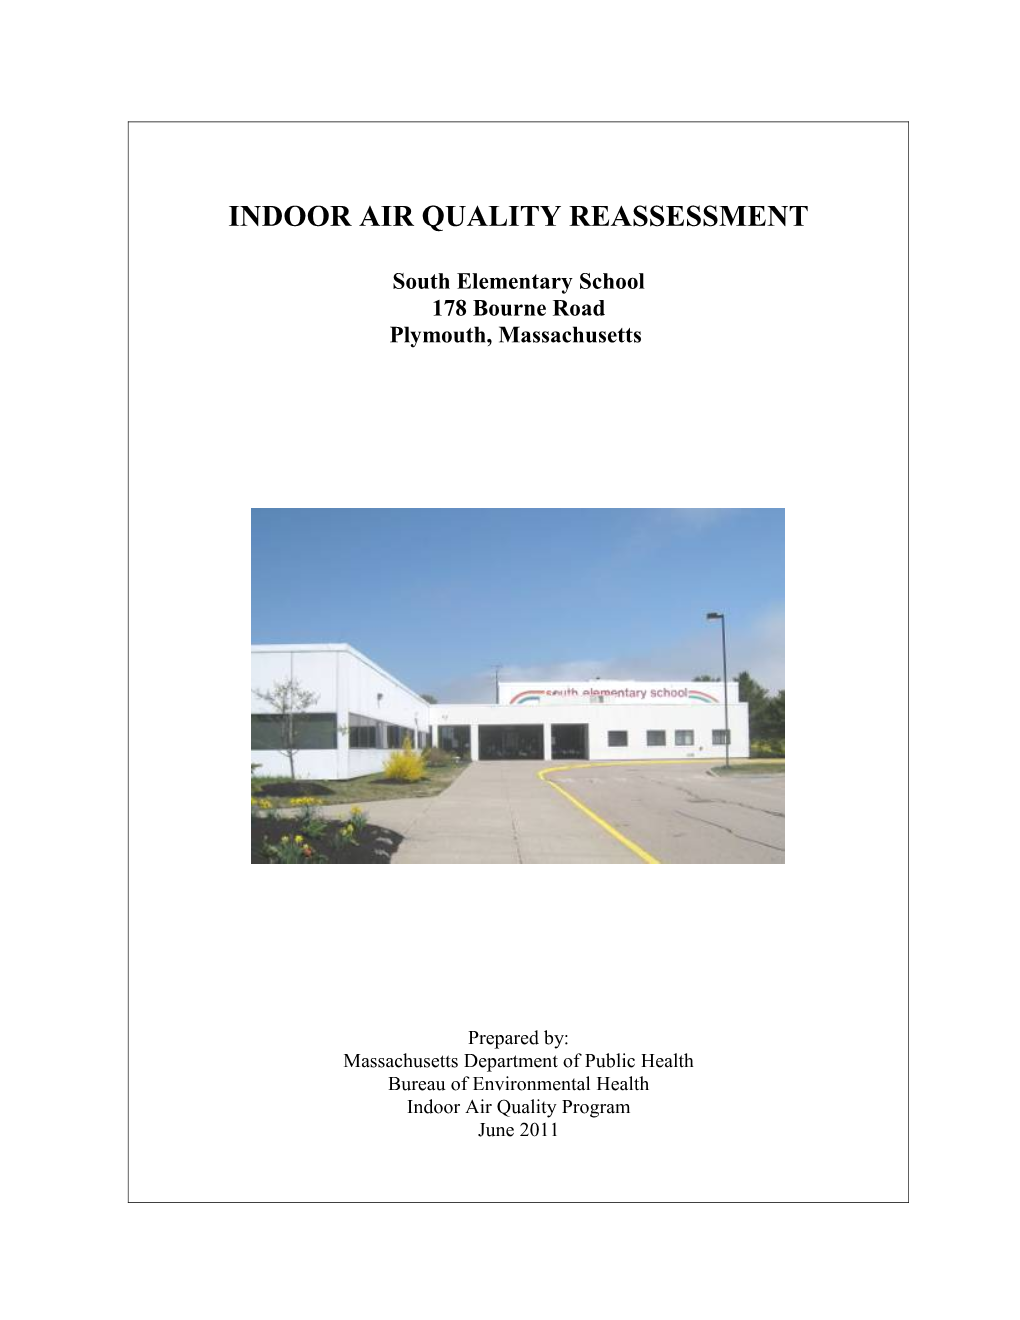 INDOOR AIR QUALITY Reassessment